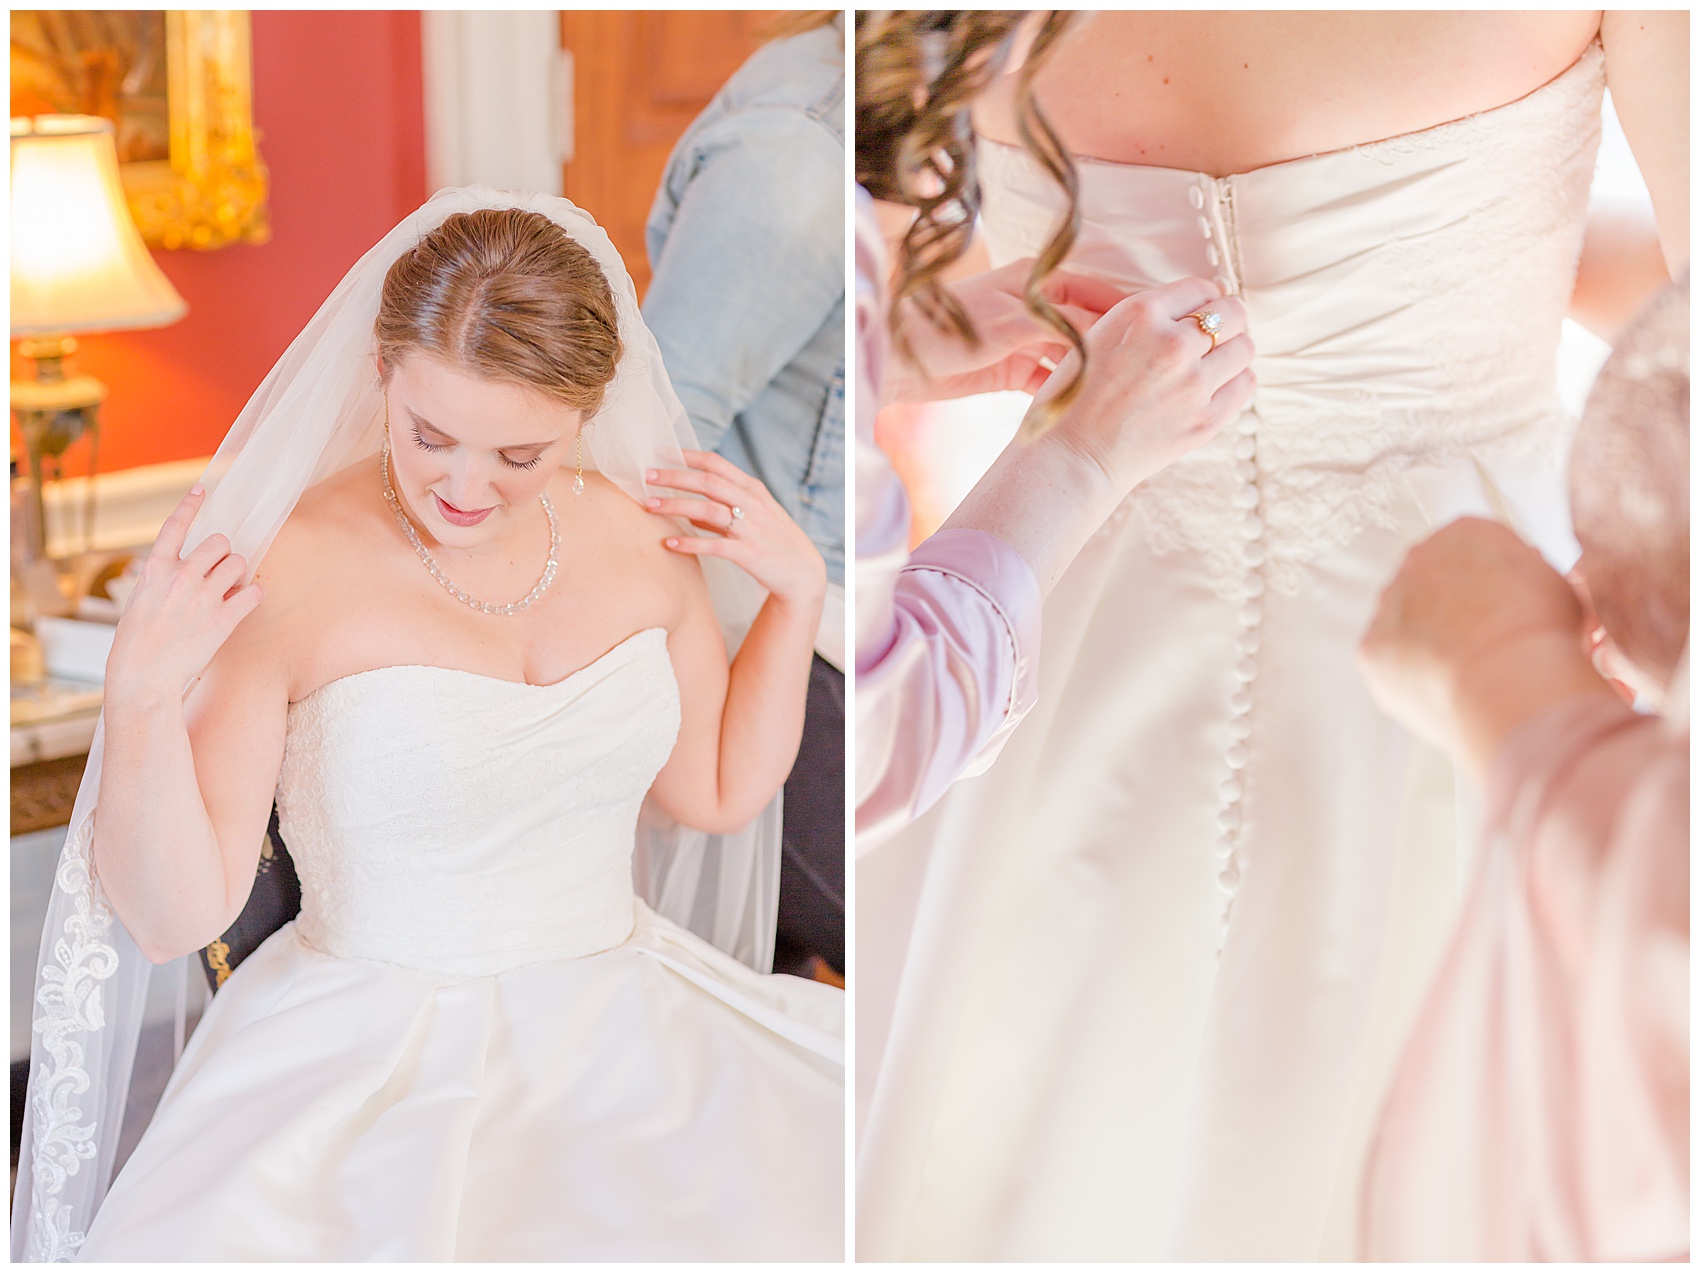 Spring Charleston Wedding at The William Aiken House getting ready